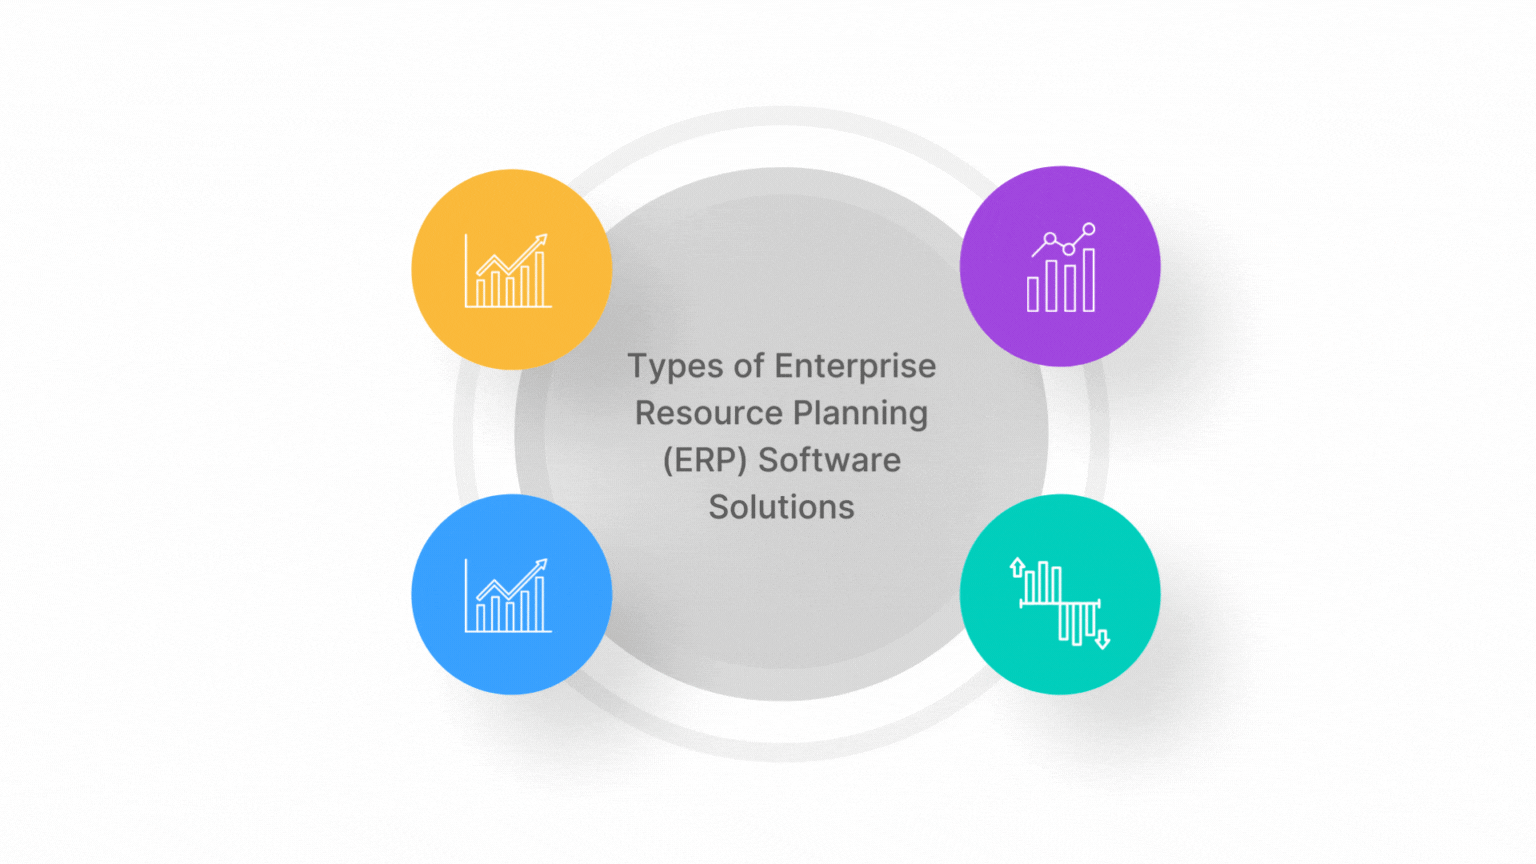 Types of Enterprise Resource Planning Software Solutions (1)